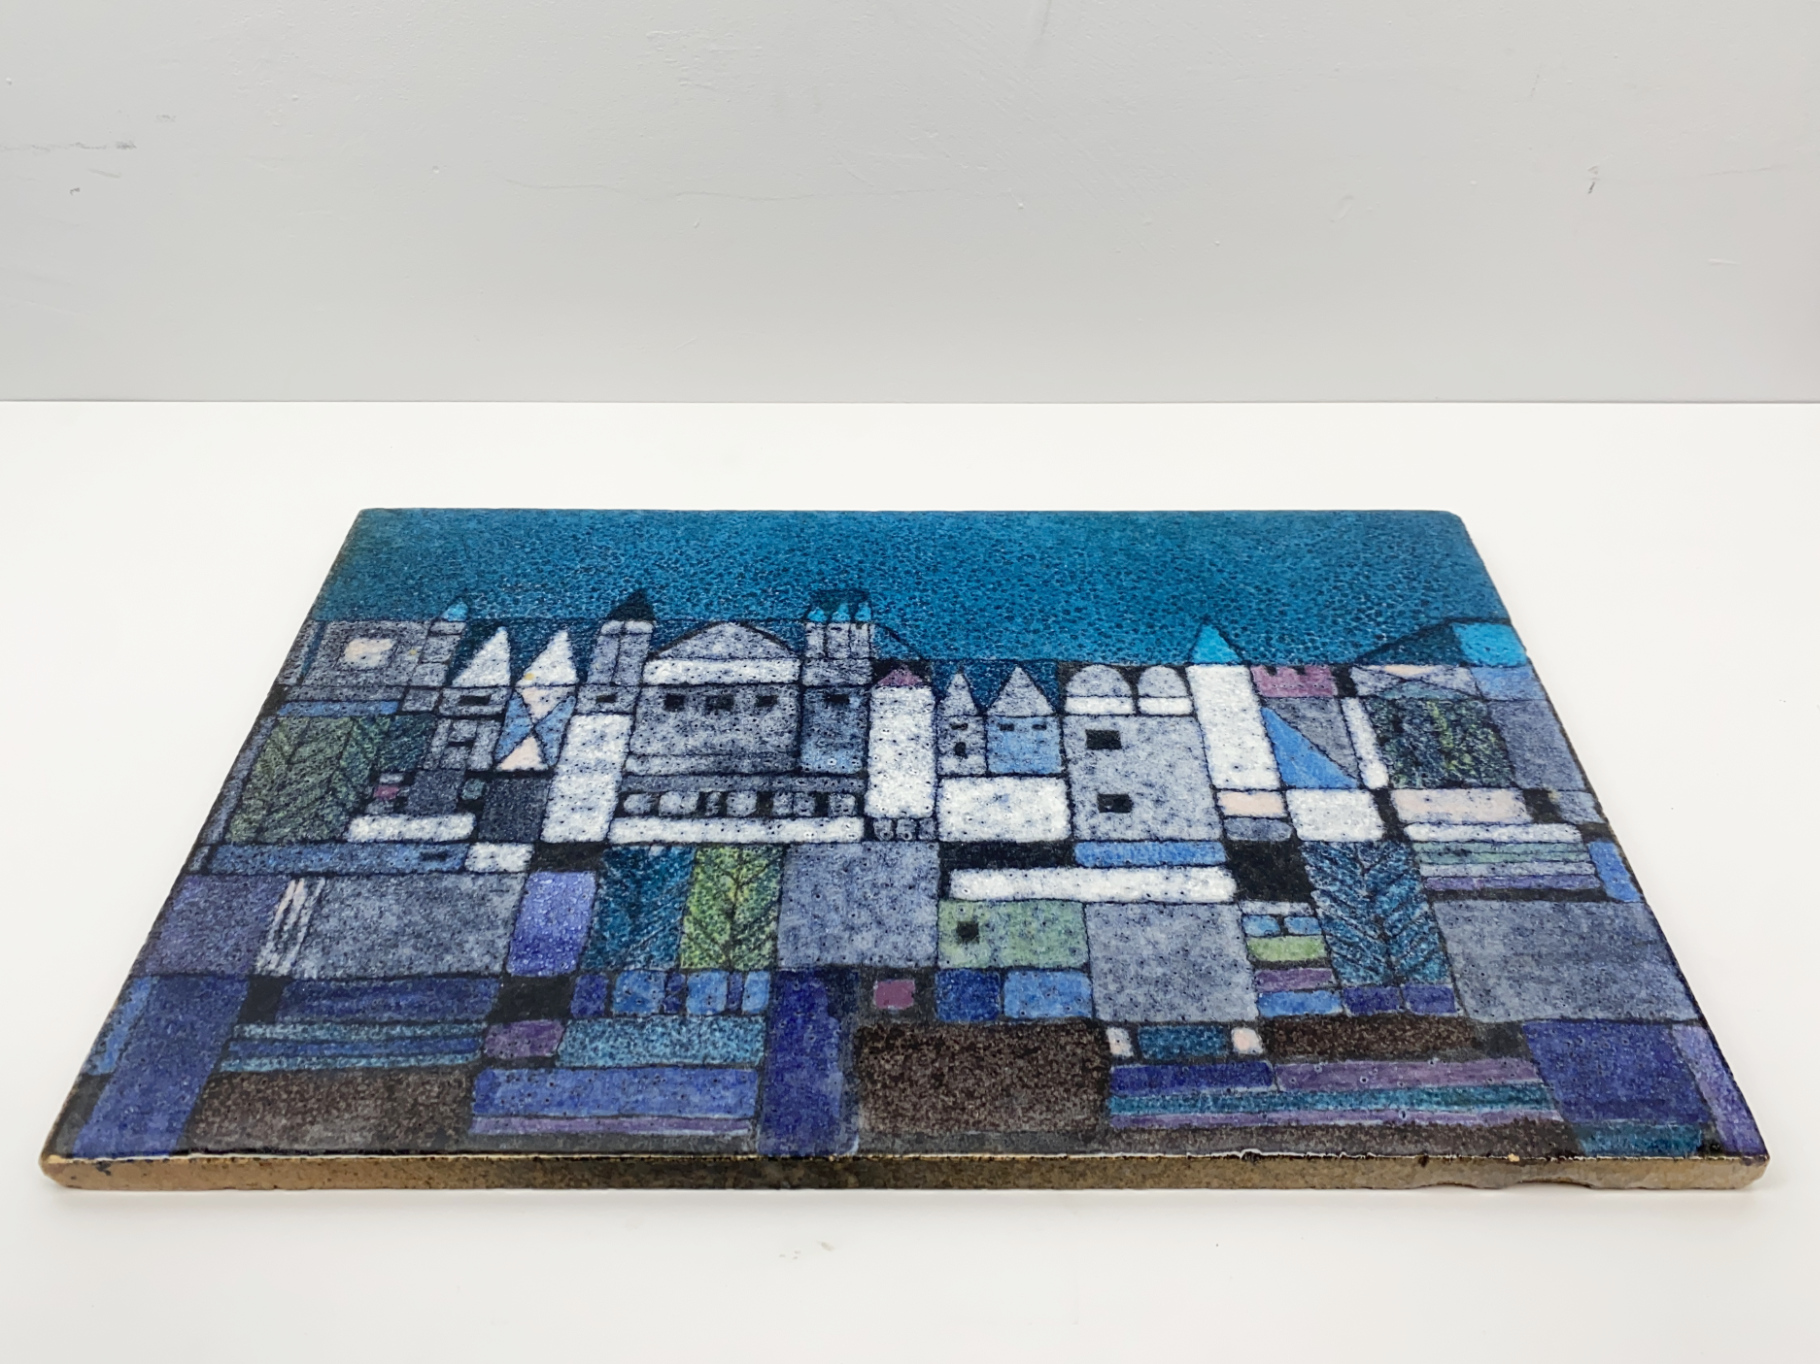 Wall Plate, Mural, Ceramic, Earthenware, Unique Piece, City Panorama, painted with colored Glazes, by Wilhelm & Elly Kuch, 1968